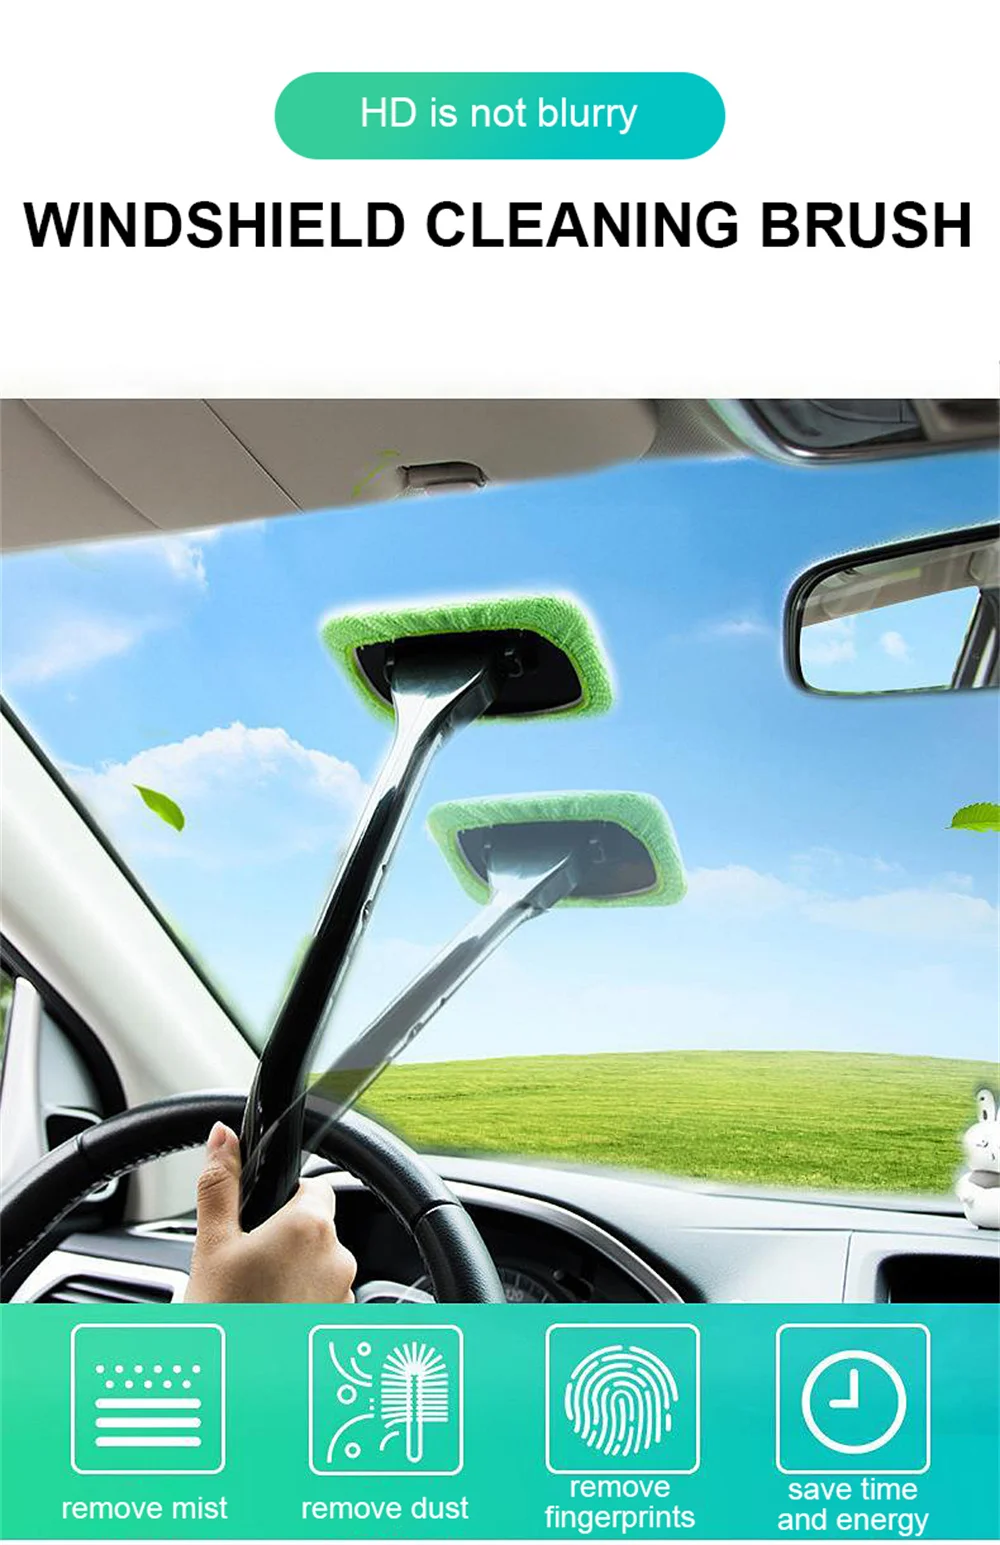 Car Window Cleaner Brush Kit Windshield Cleaning Wash Tool Inside Interior Auto Glass Wiper With Long Handle Car Accessories